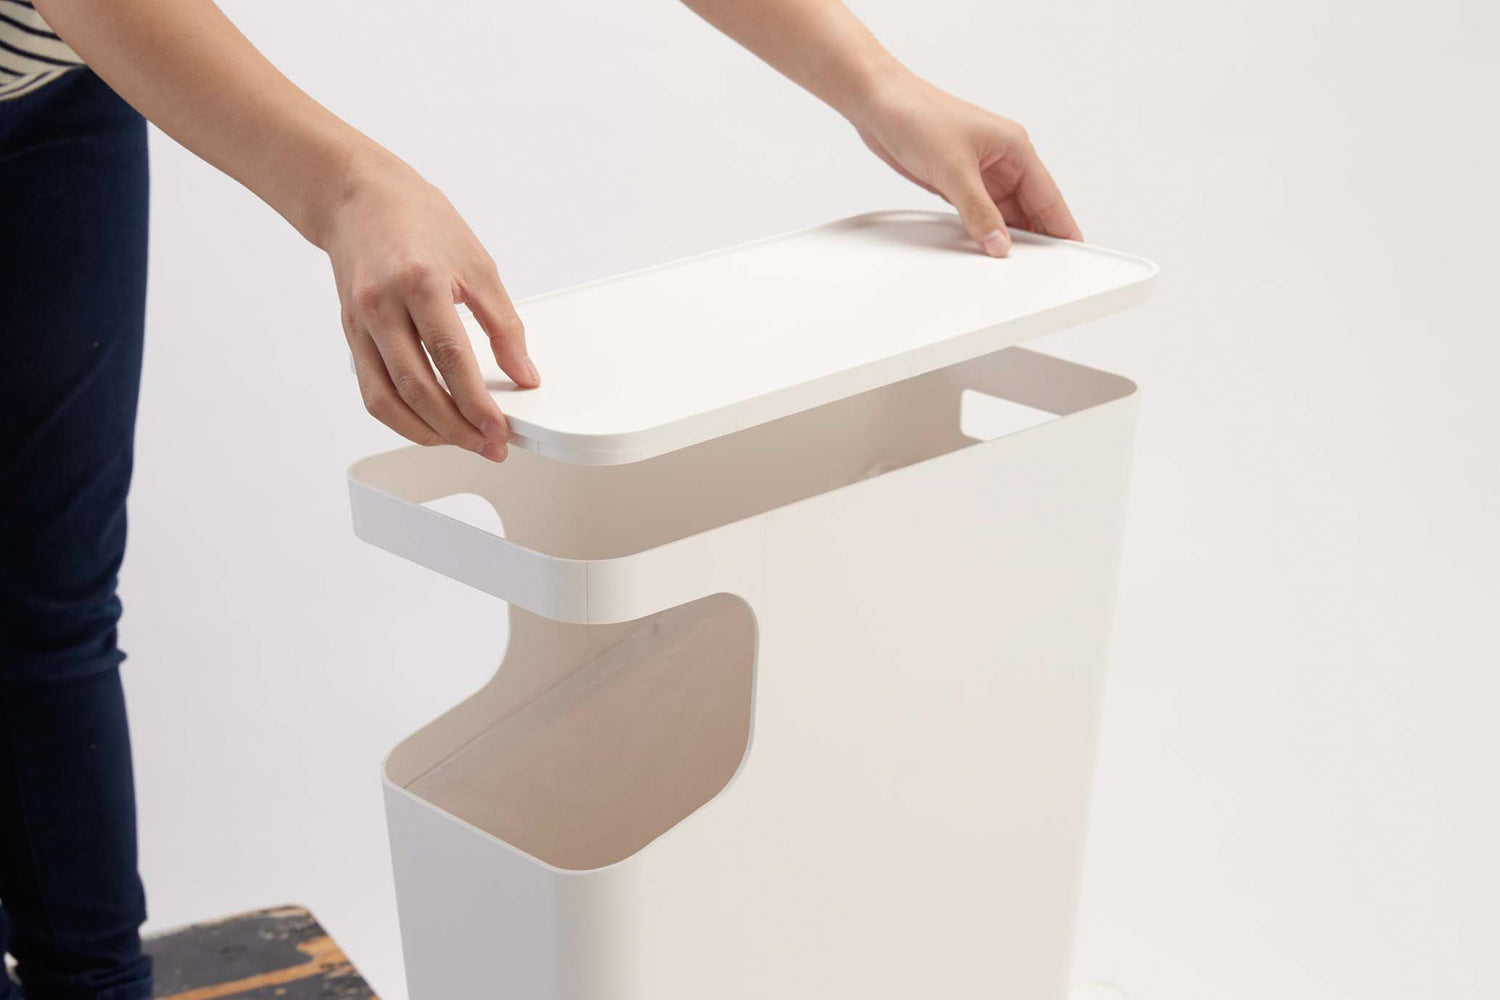 View 6 - White Side Table Trash Can with lid removed on white background by Yamazaki Home.